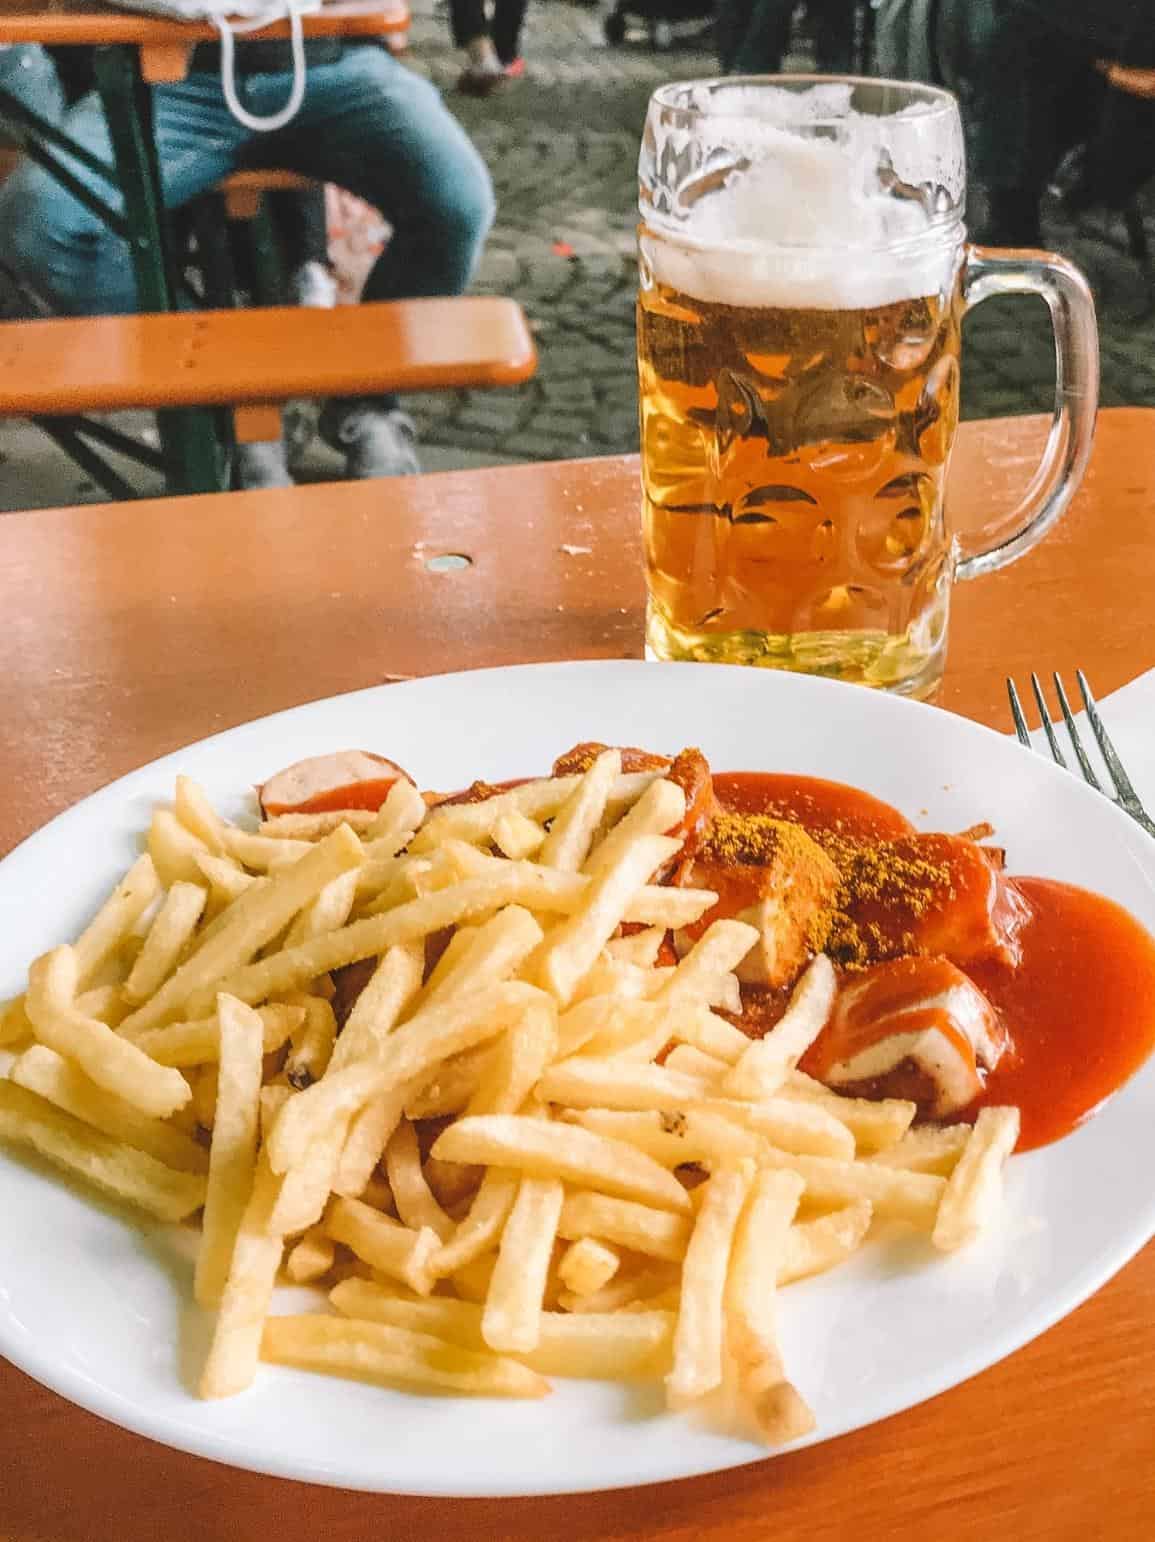 Currywurst, fries and an icy German beer from the Viktualienmarkt, the best food market in Munich 